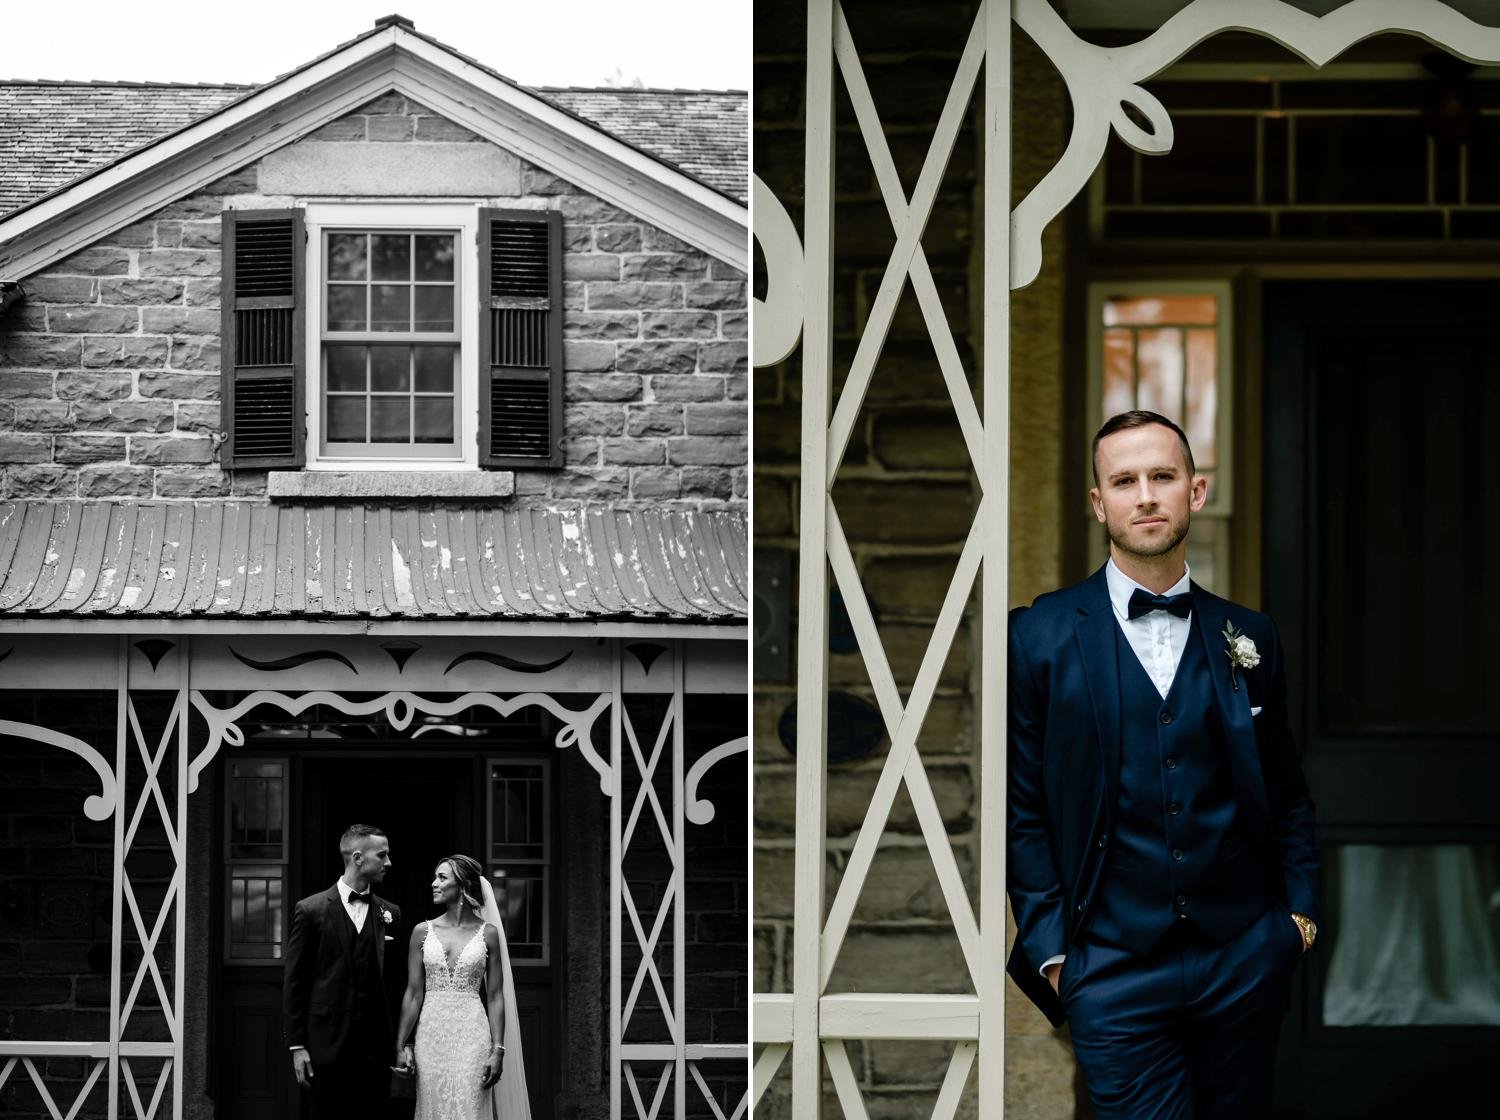 photos of the bride and groom at an evermore wedding